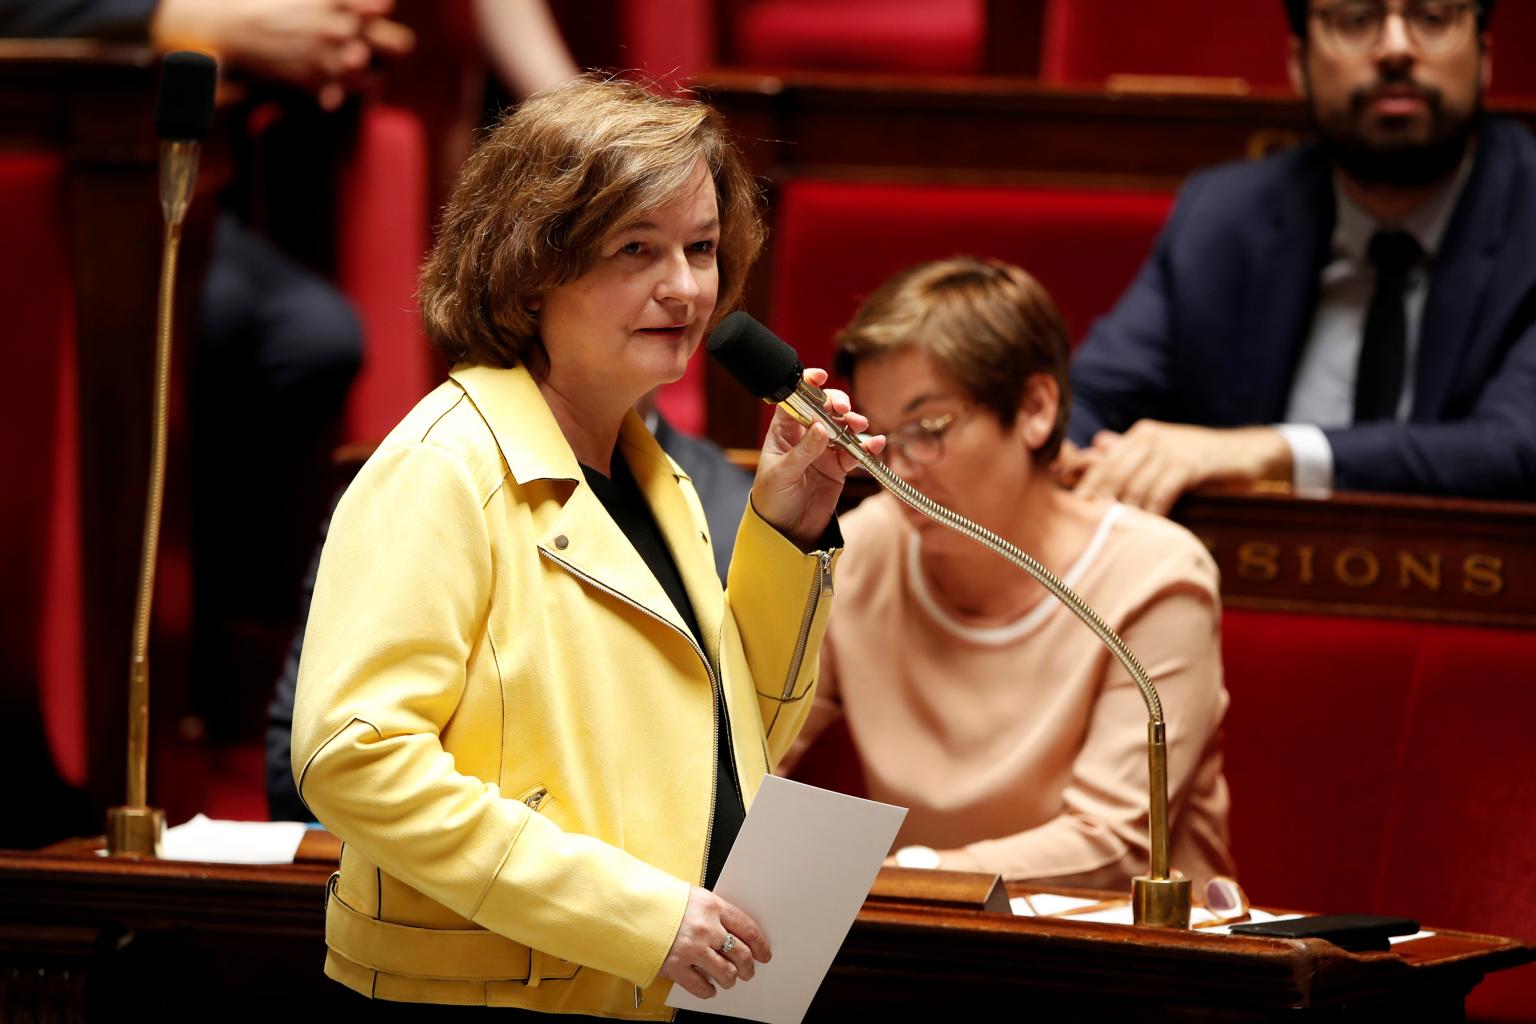 France won't take any lessons from Rome on immigration, says minister